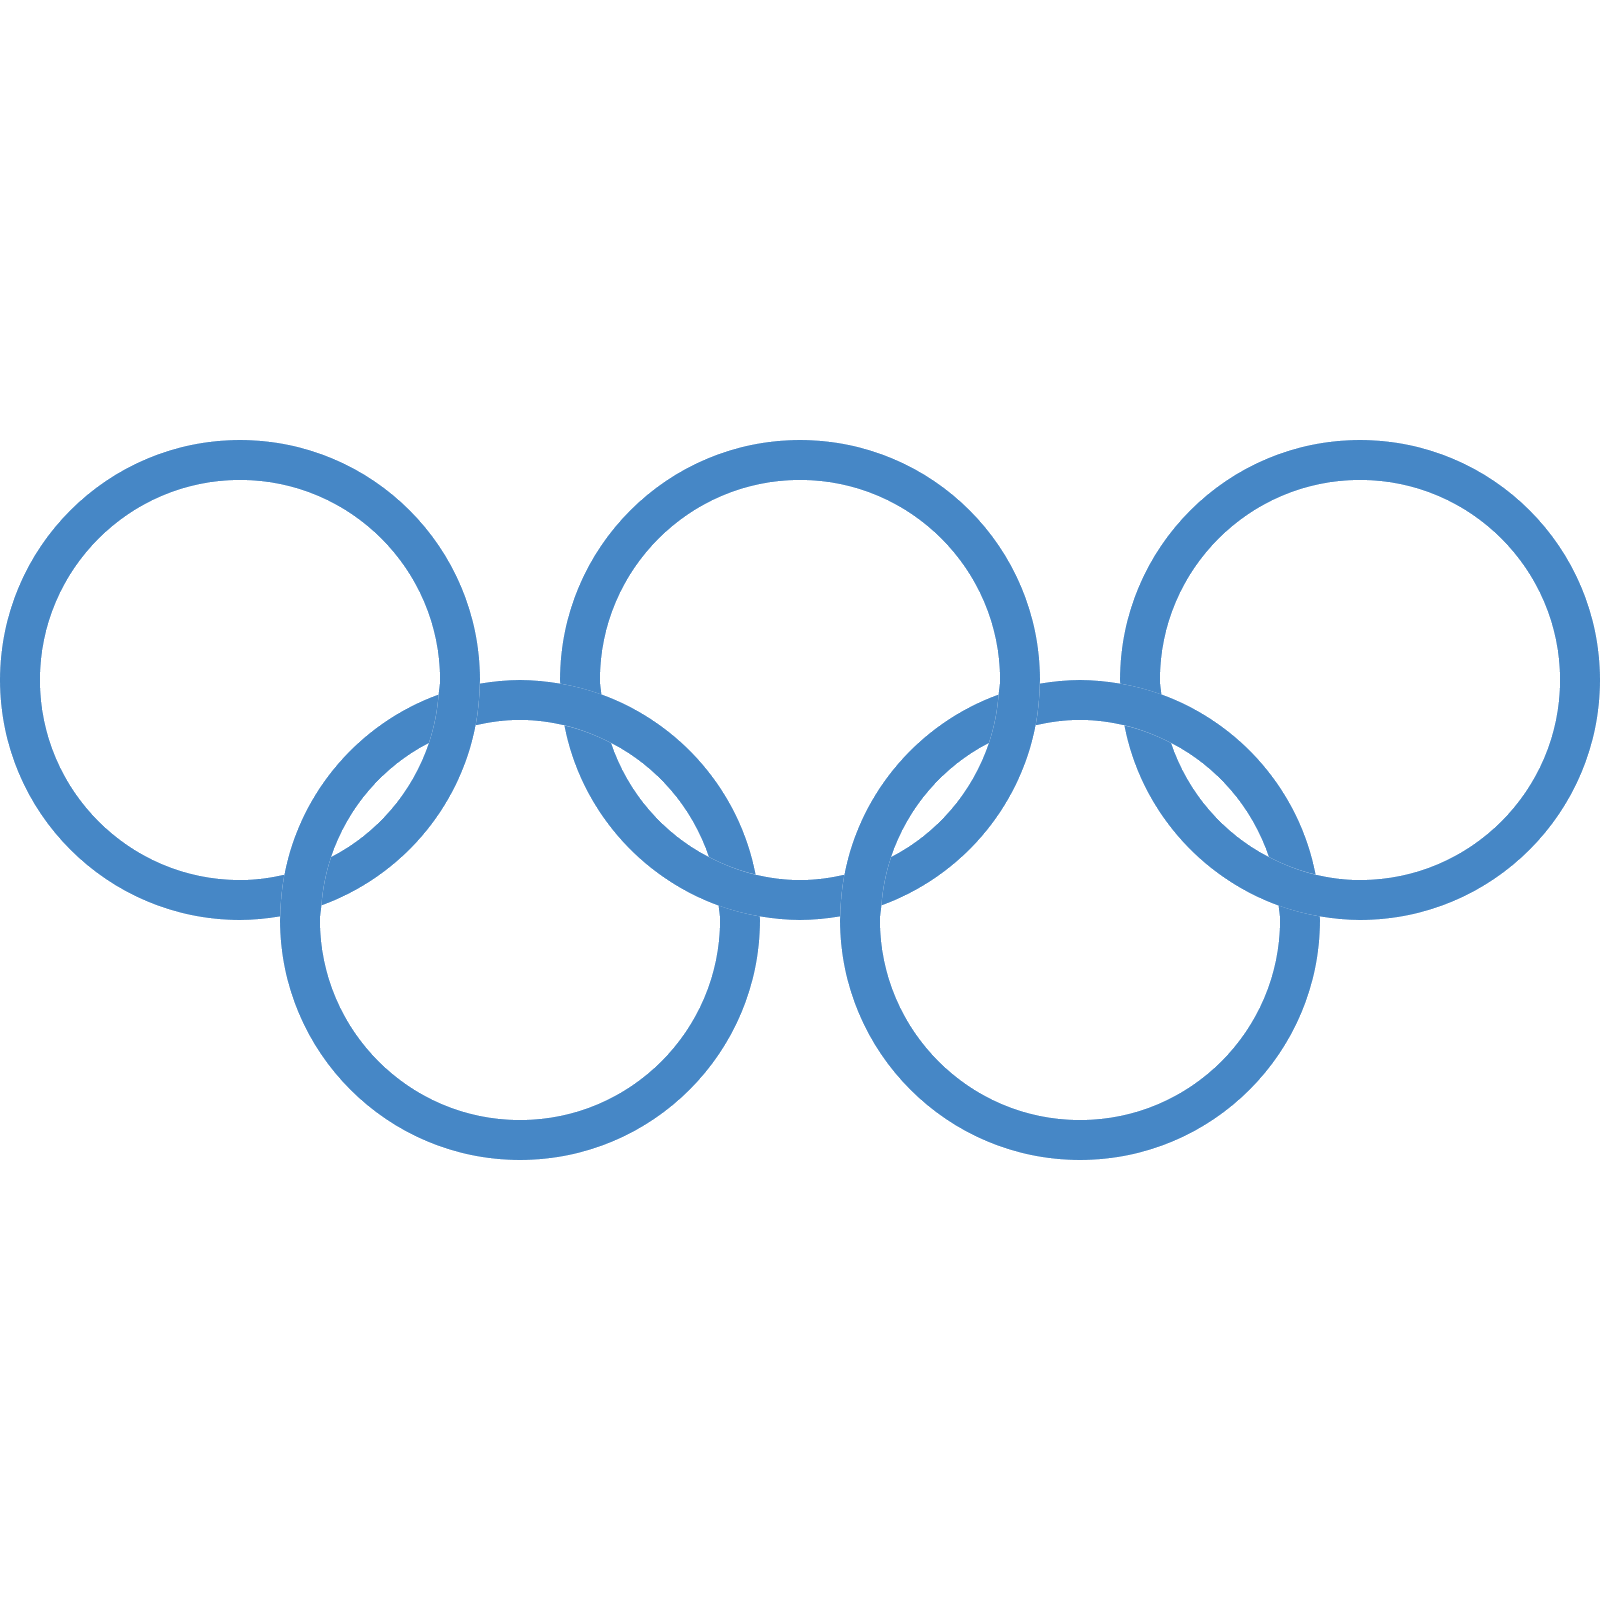 transparent background olympic rings logo olympic rings